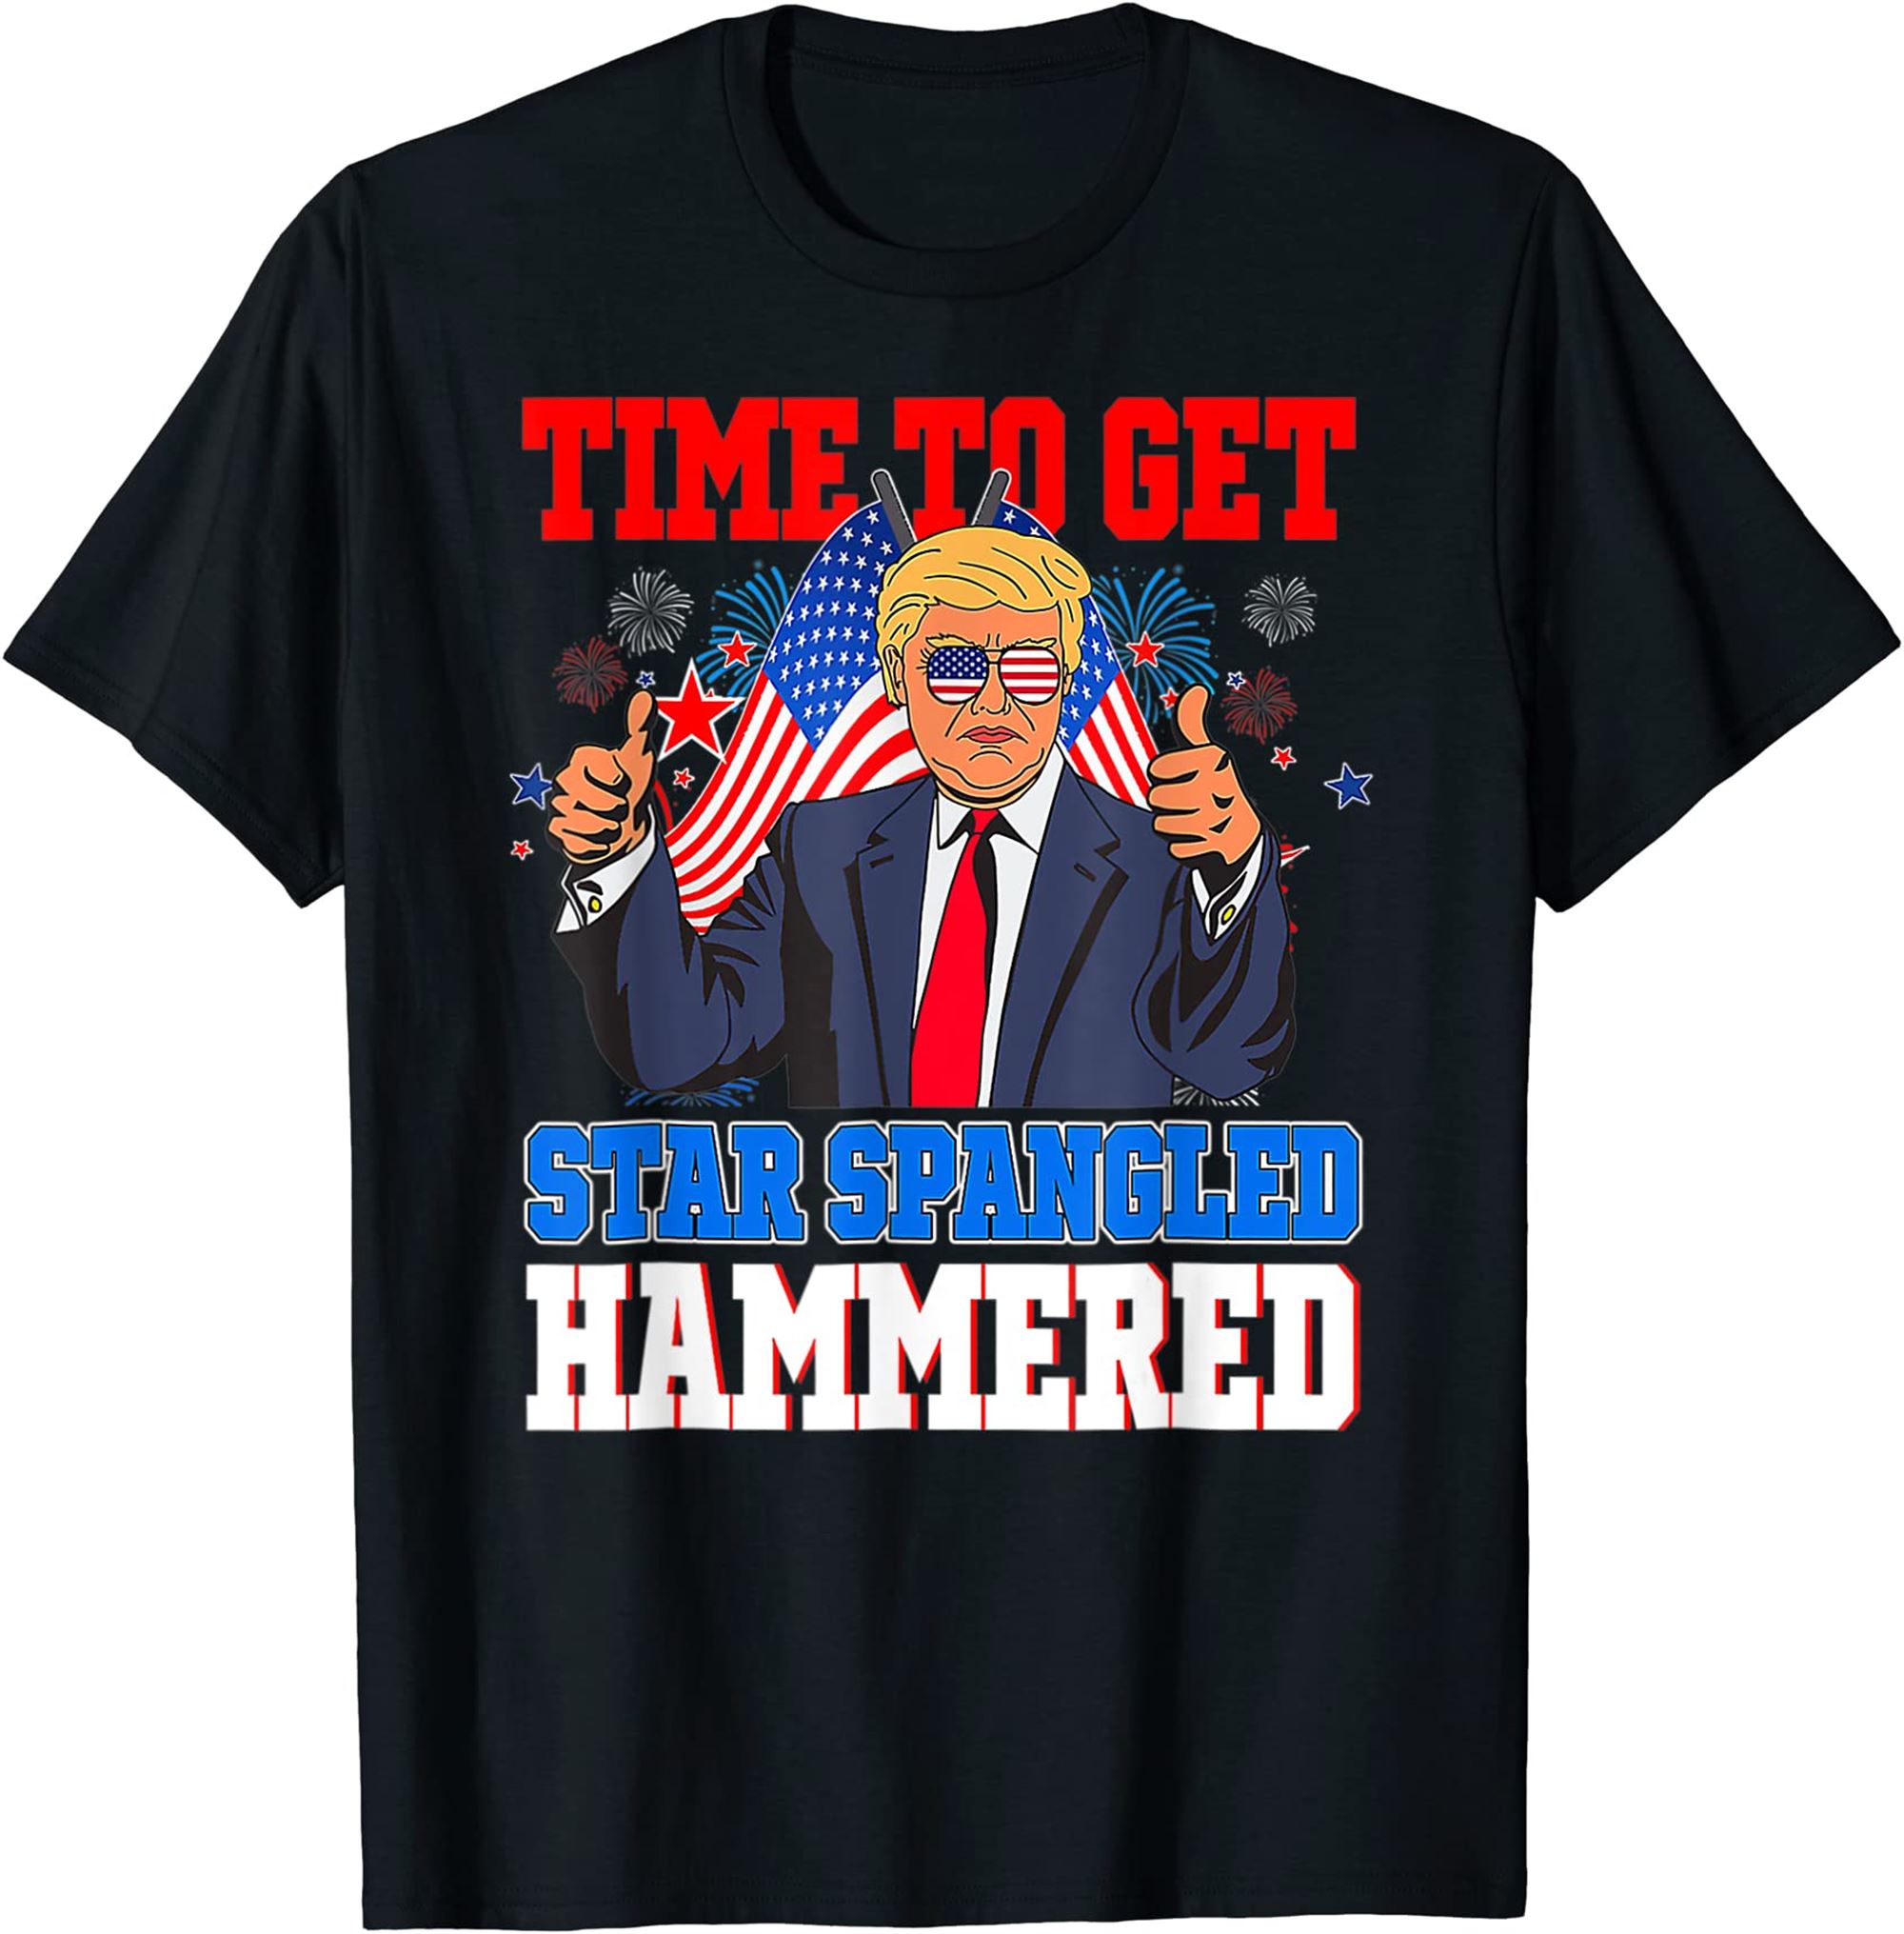 Trump Merica 4th Of July Time To Get Star Spangled Hammered T-shirt Plus Size Up To 5xl